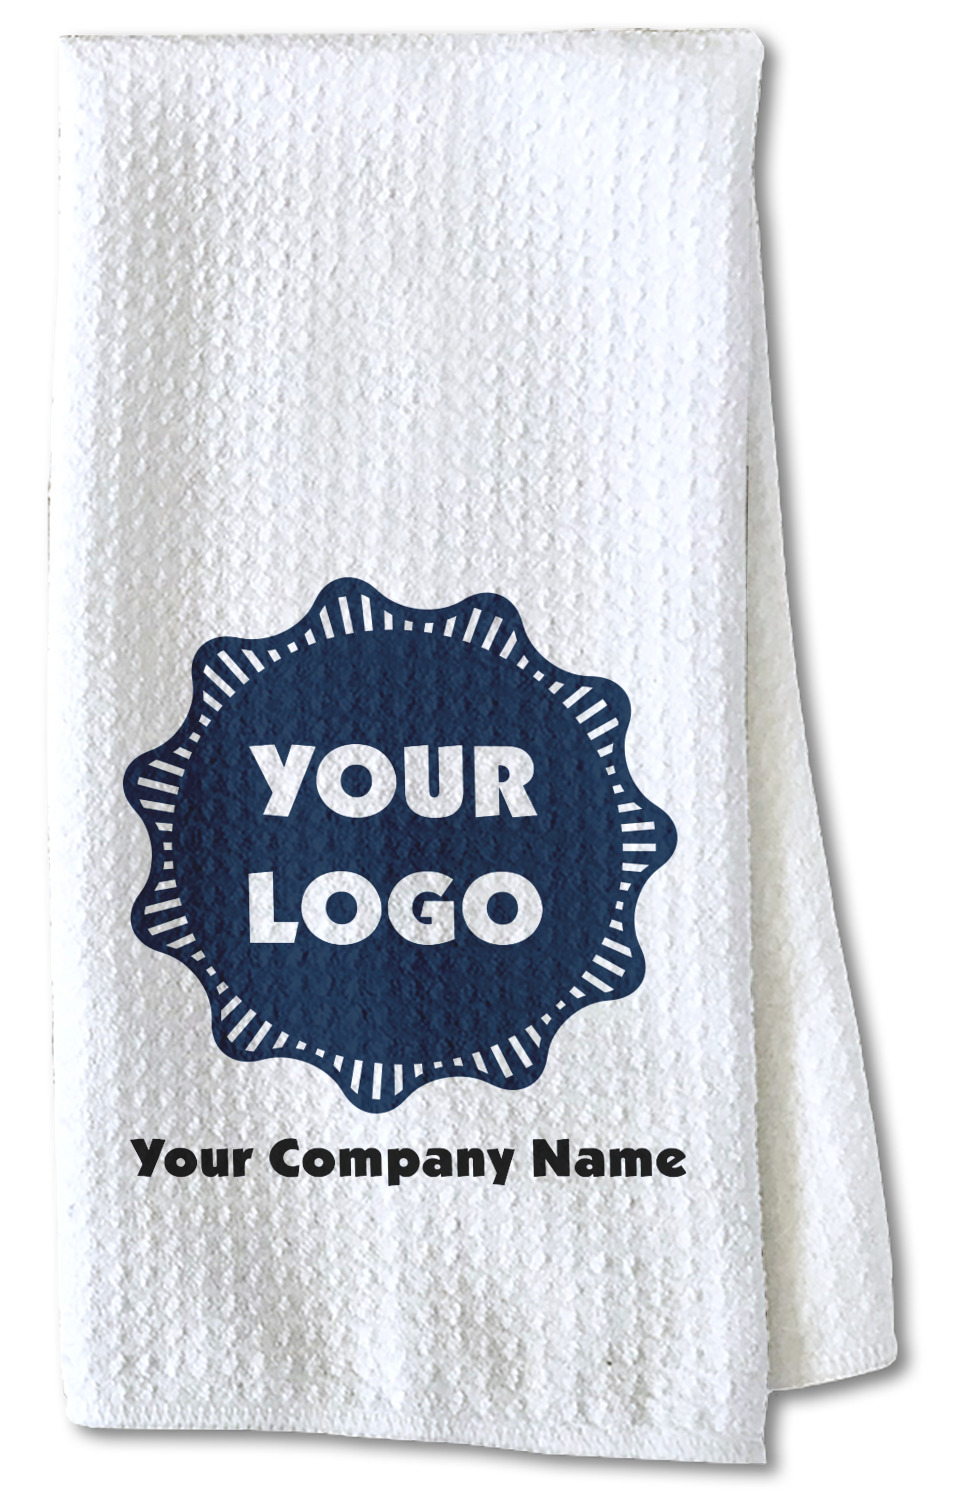 https://www.youcustomizeit.com/common/MAKE/638421/Logo-Company-Name-Waffle-Towel-Partial-Print-MAIN-new-imf.jpg?lm=1697657081